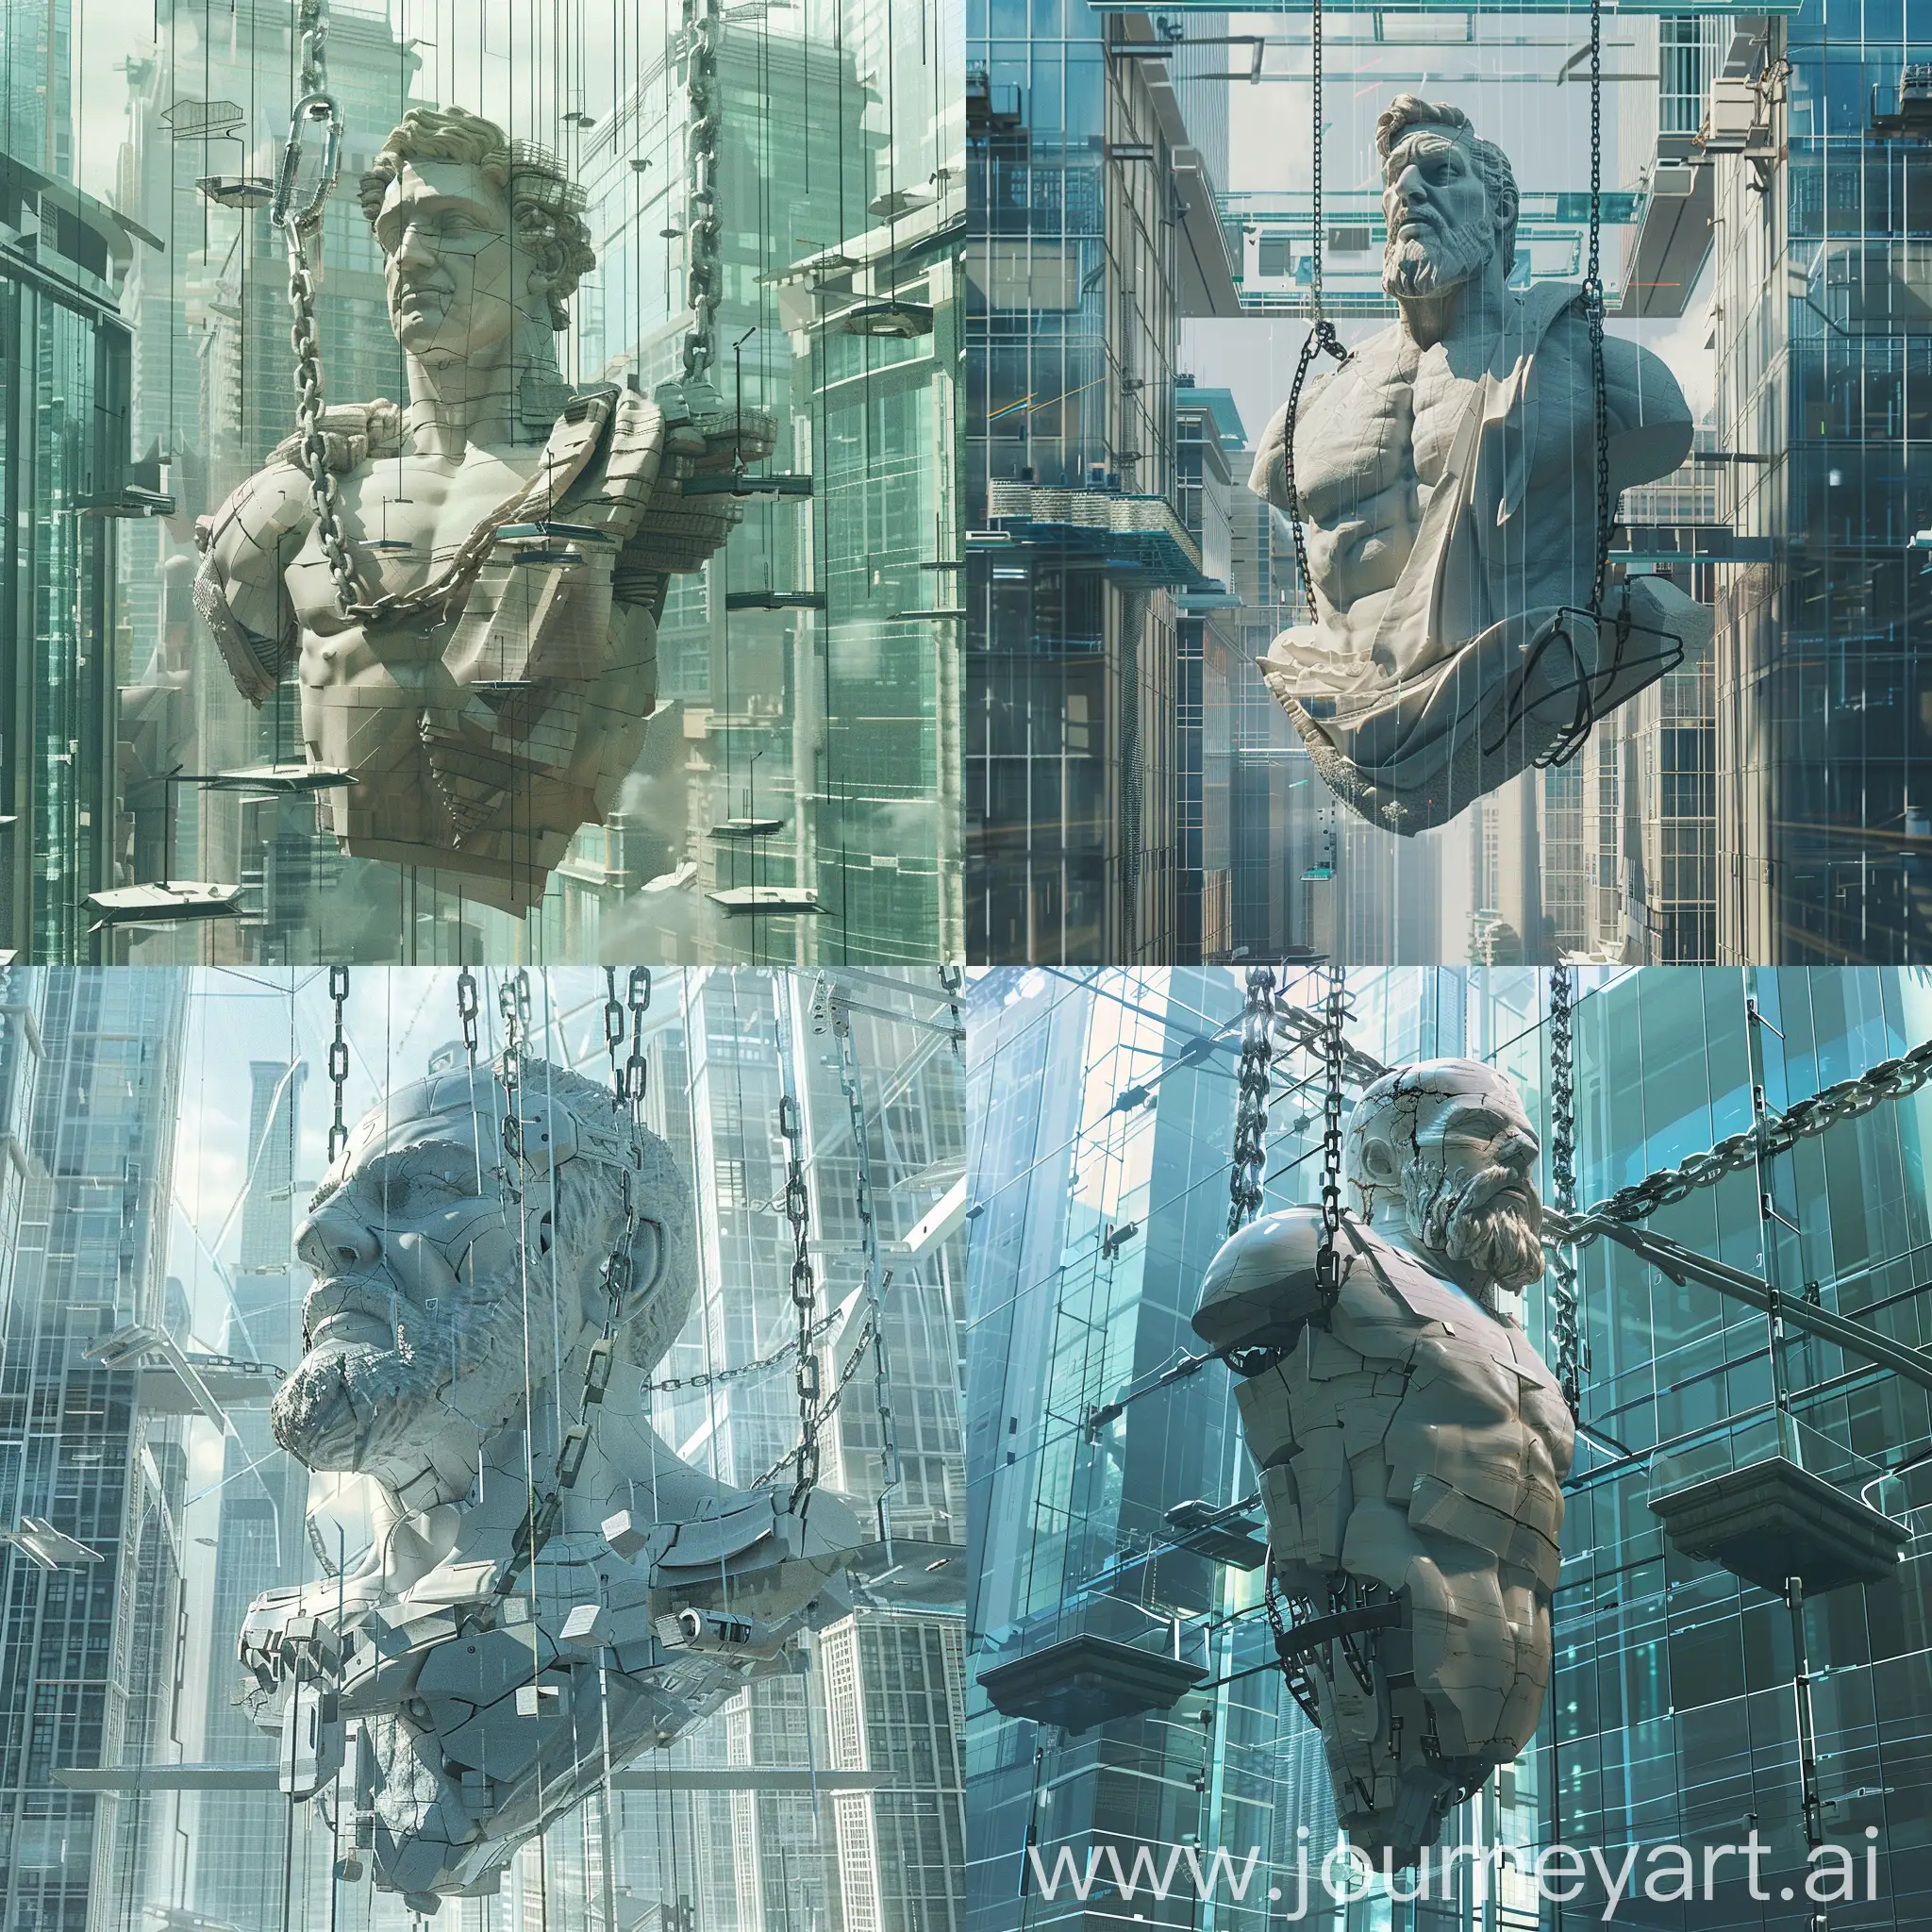 Digital-Liberation-Monument-to-Gastes-Breaking-Chains-Amidst-Glass-Skyscrapers